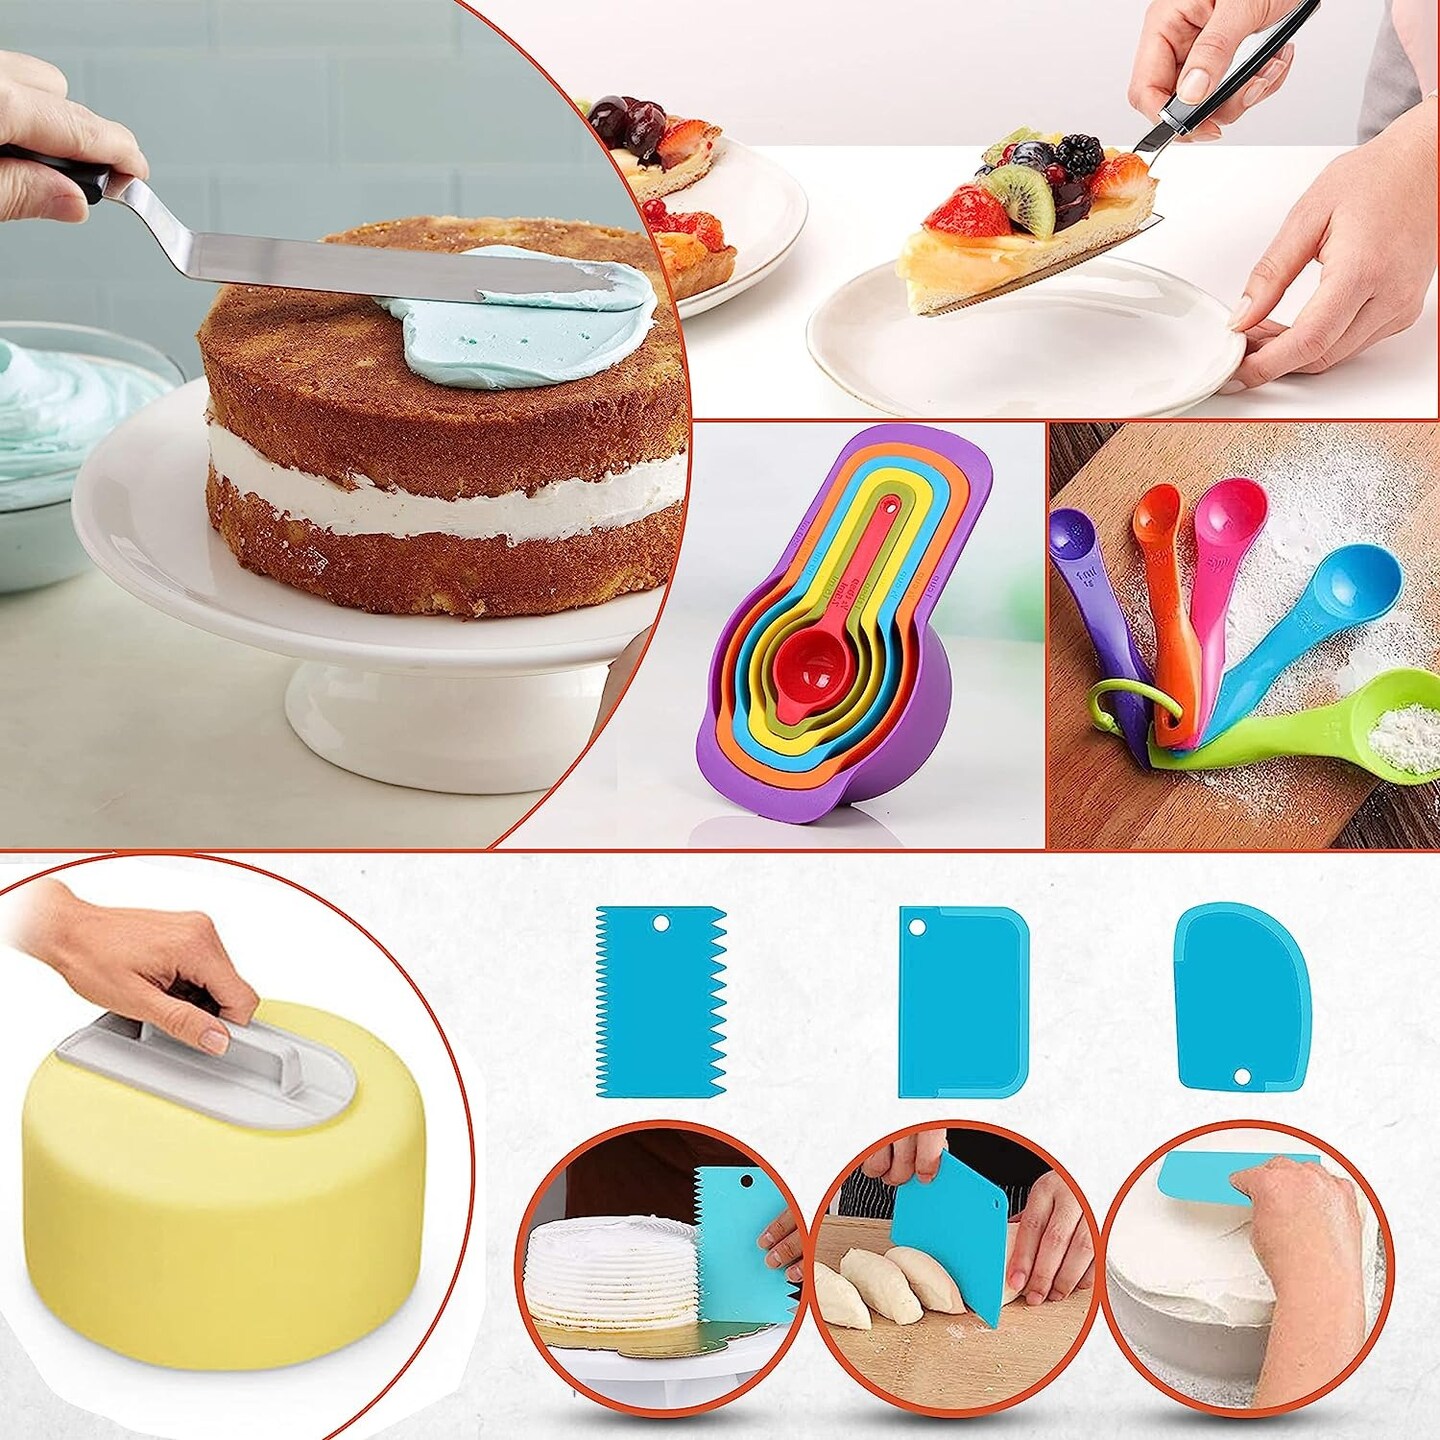 Cake Decorating Supplies Kit with Baking Supplies 700 Pieces